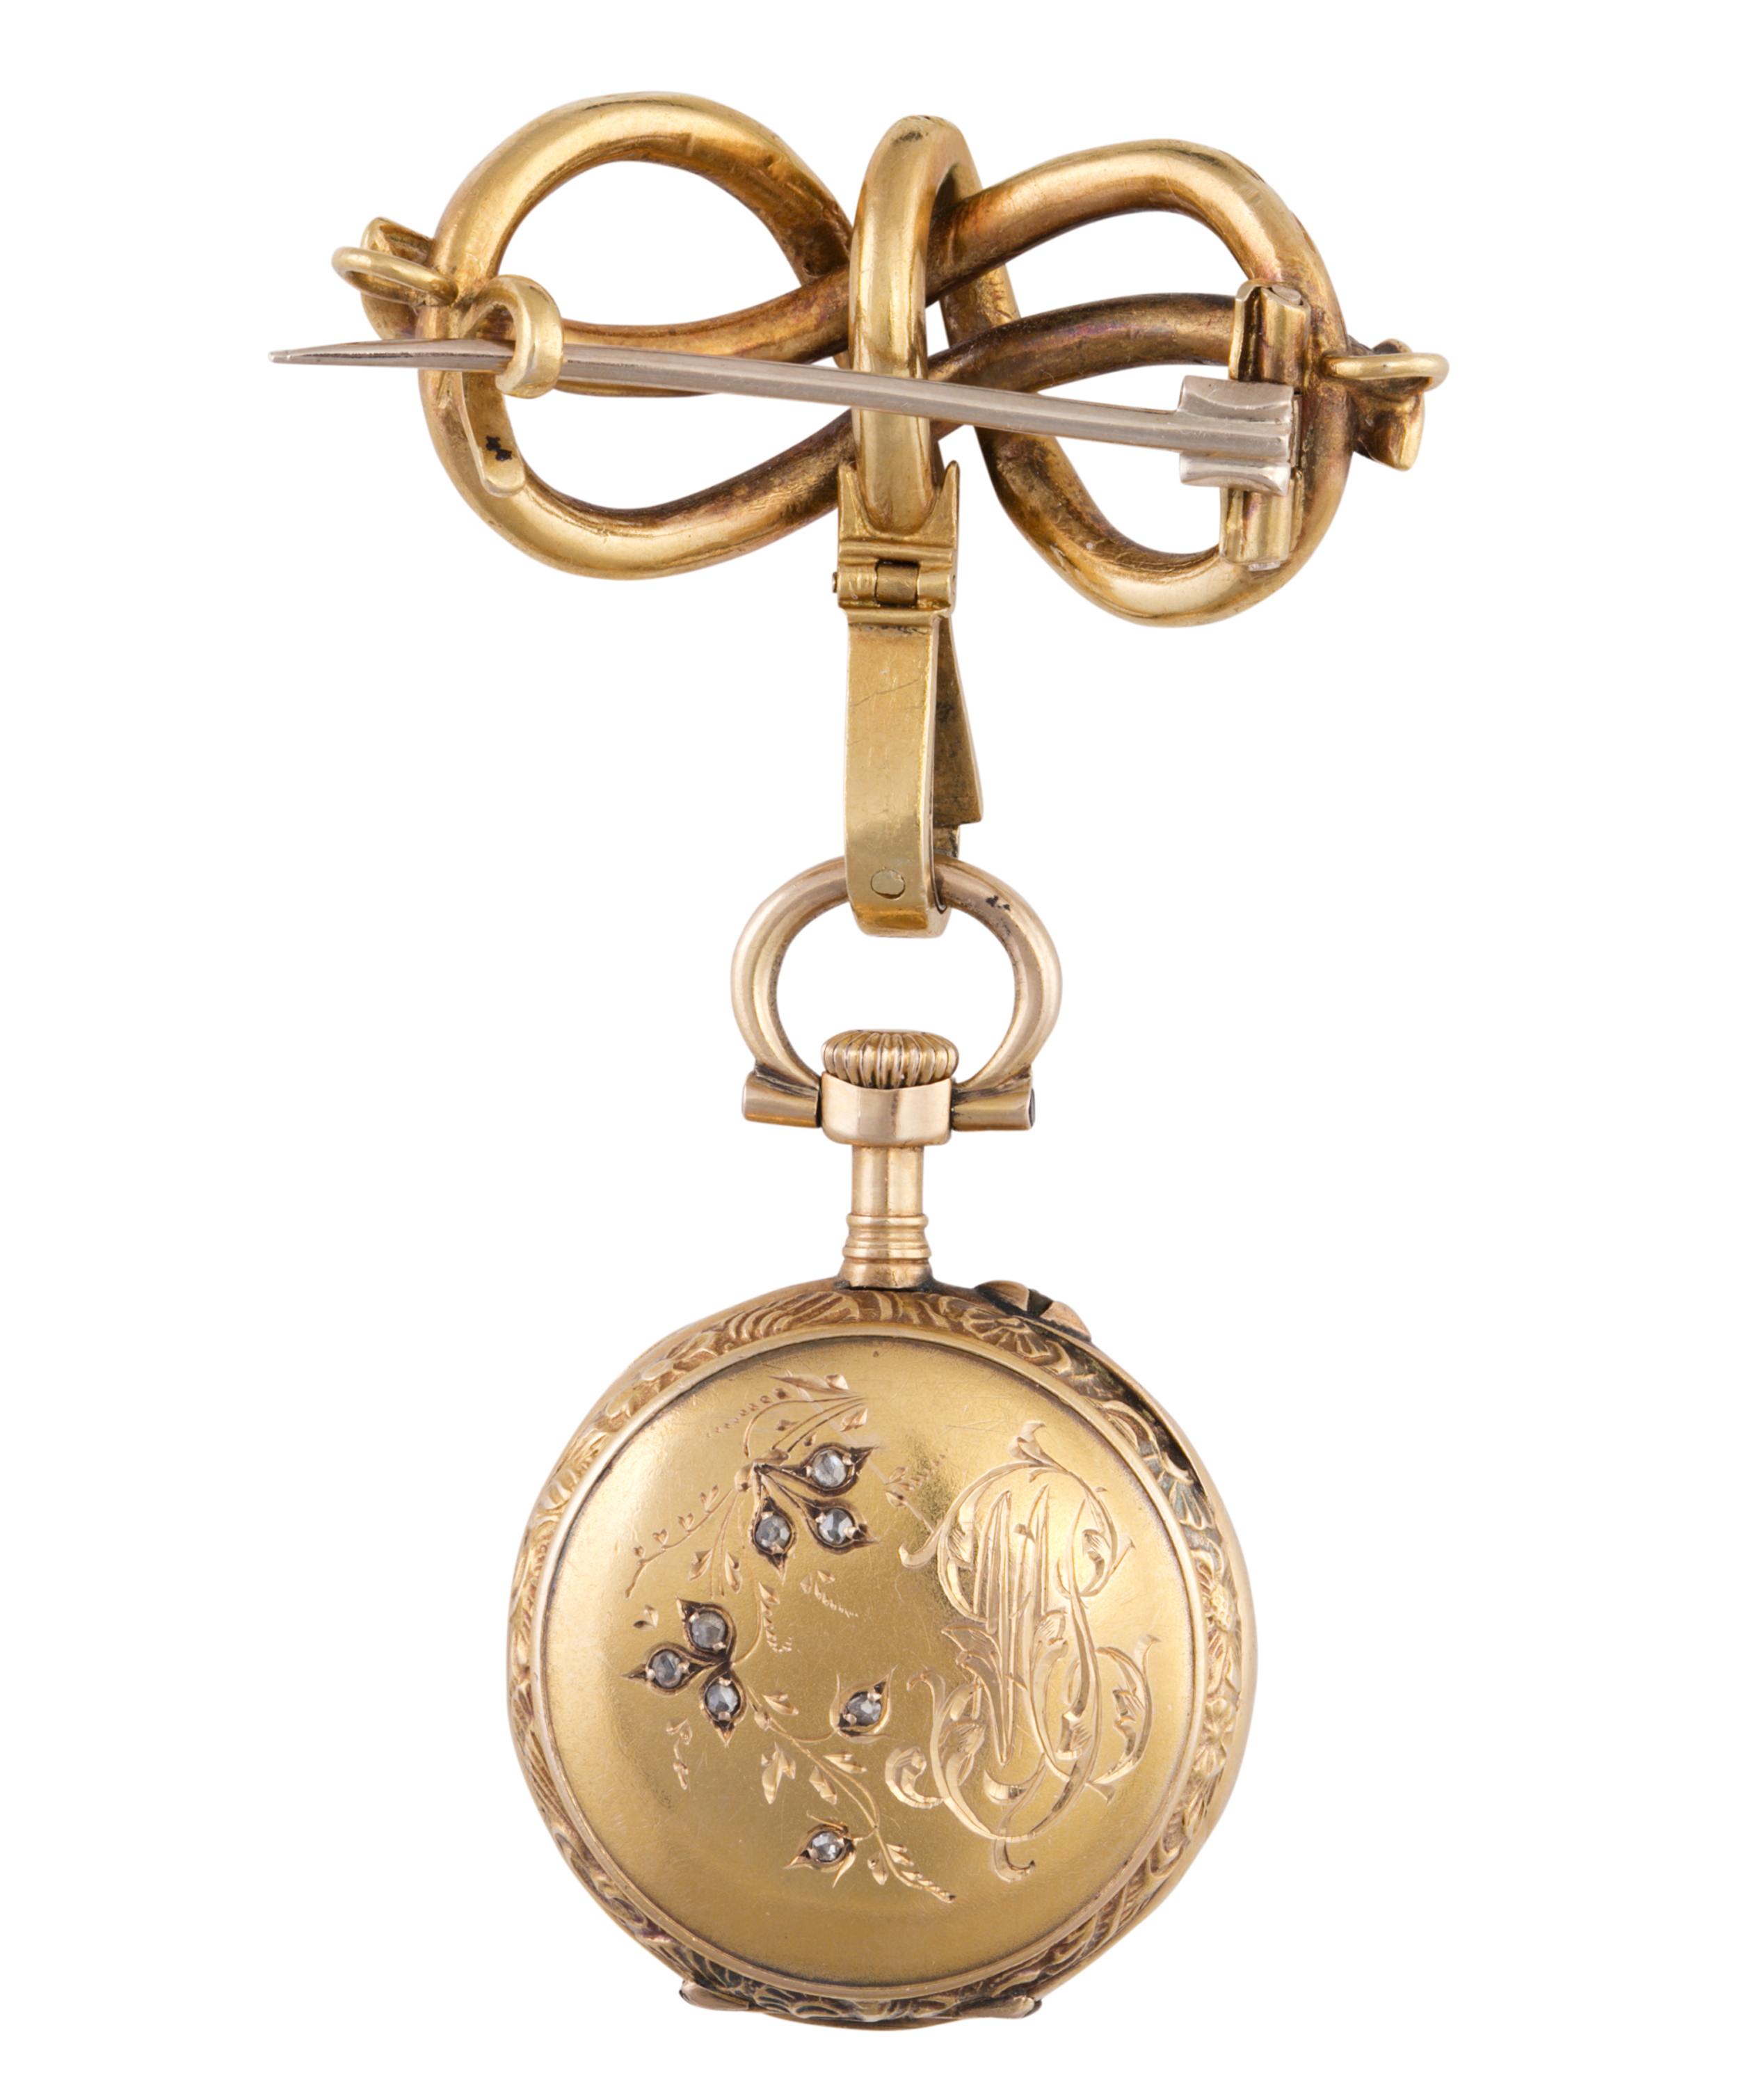 A LATE 19TH CENTURY FRENCH LADIES GOLD AND DIAMOND POCKET WATCH, suspended from an engraved and - Image 2 of 2